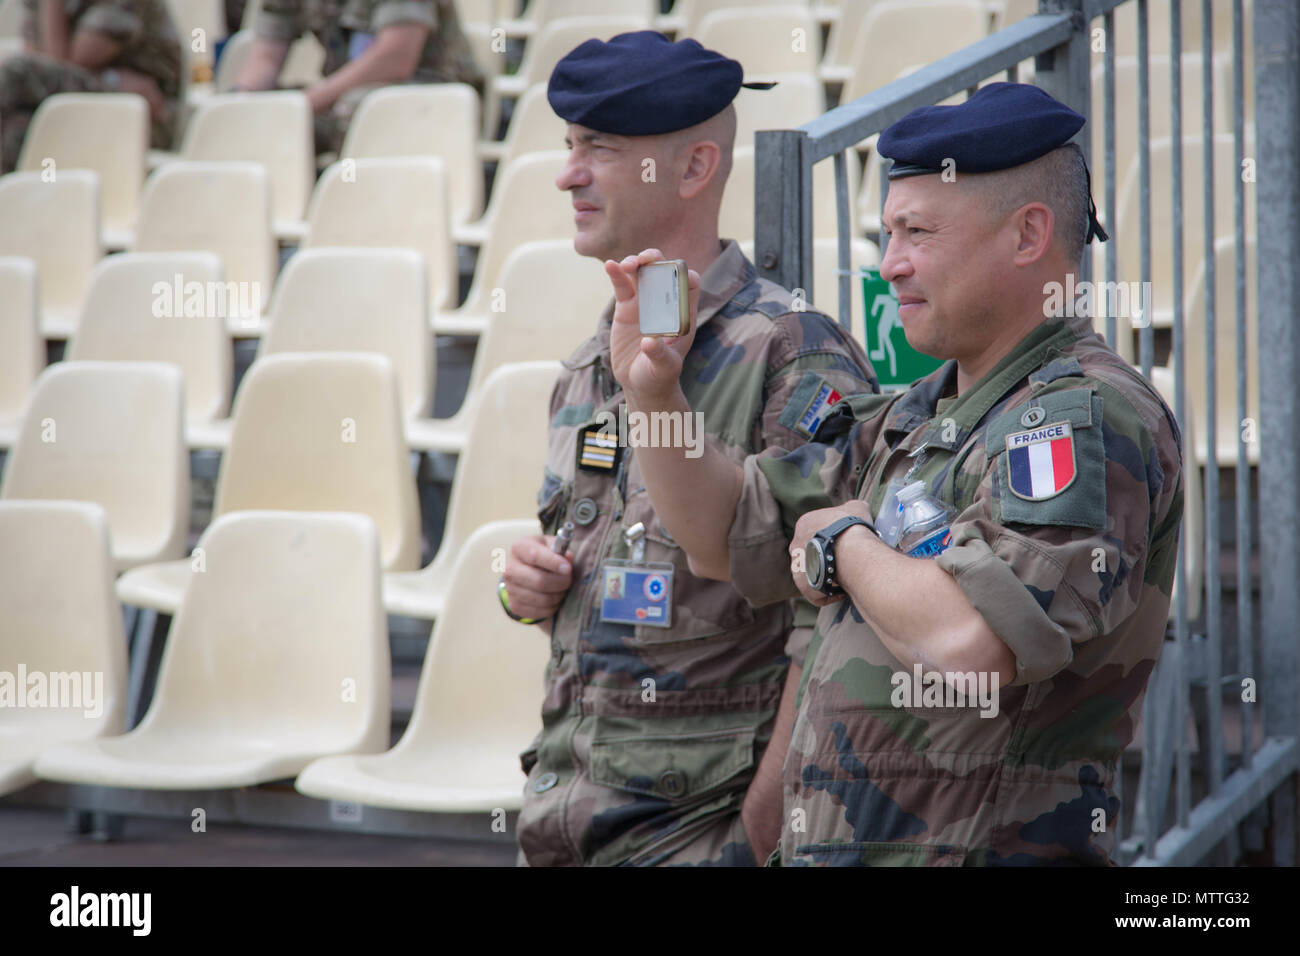 French soldiers are entertained watching the dress rehearsal for the Citadelle 350 anniversary military show, May 25, 2018.  US Army photo by Sgt Joseph Agacinski/released. Stock Photo